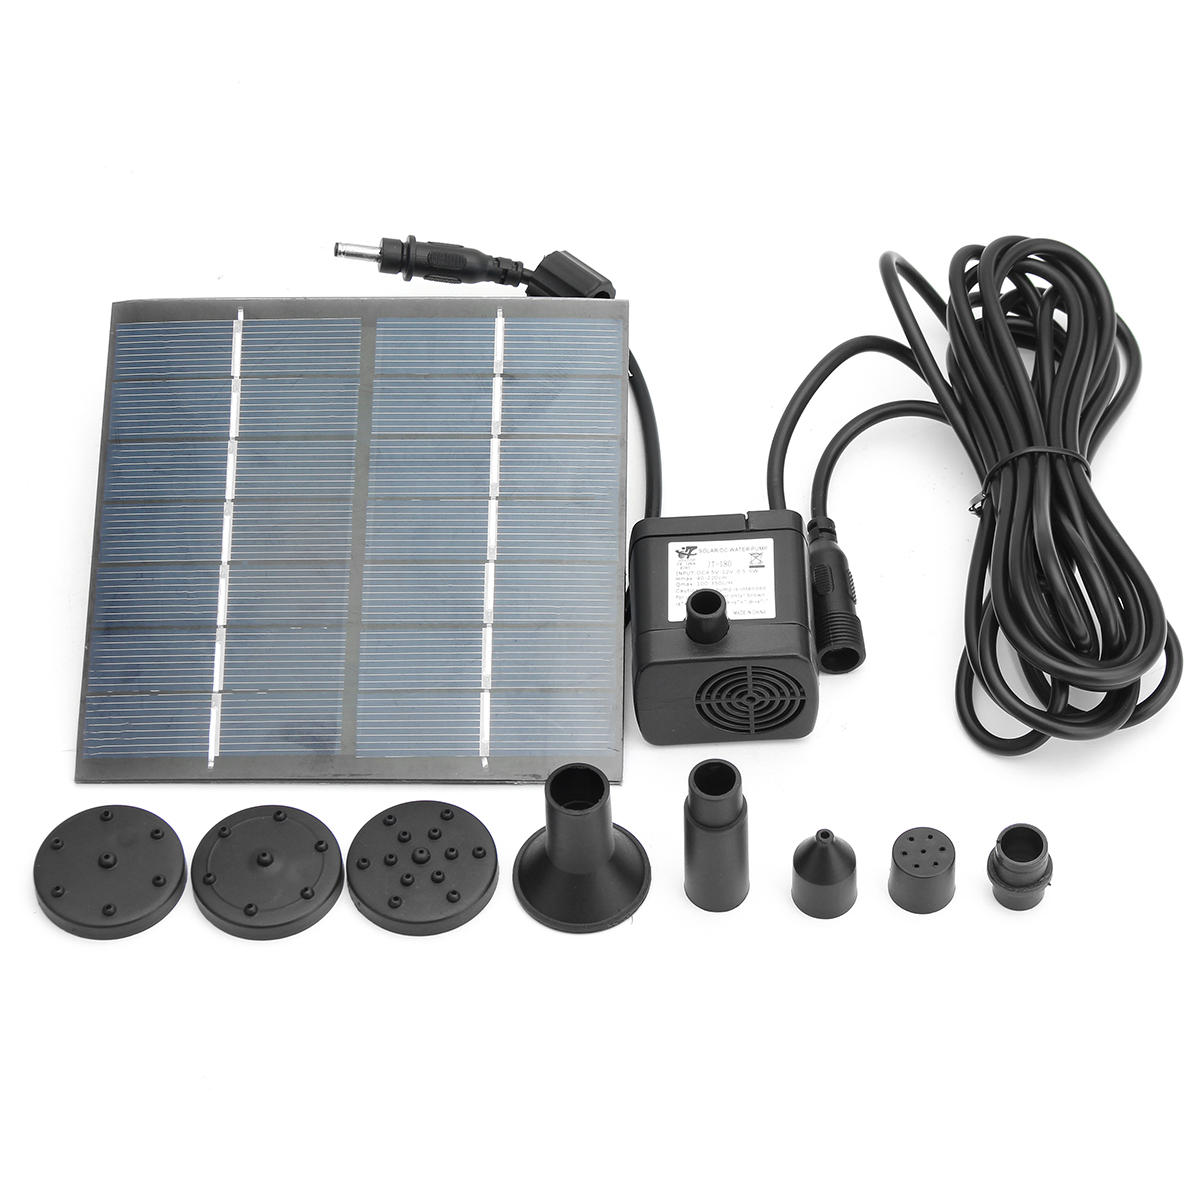 

JT-180 1.4W 7V Solar Panel Power Fountain Pump Outdoor Garden Pond Pool Submersible Water Pump Kit